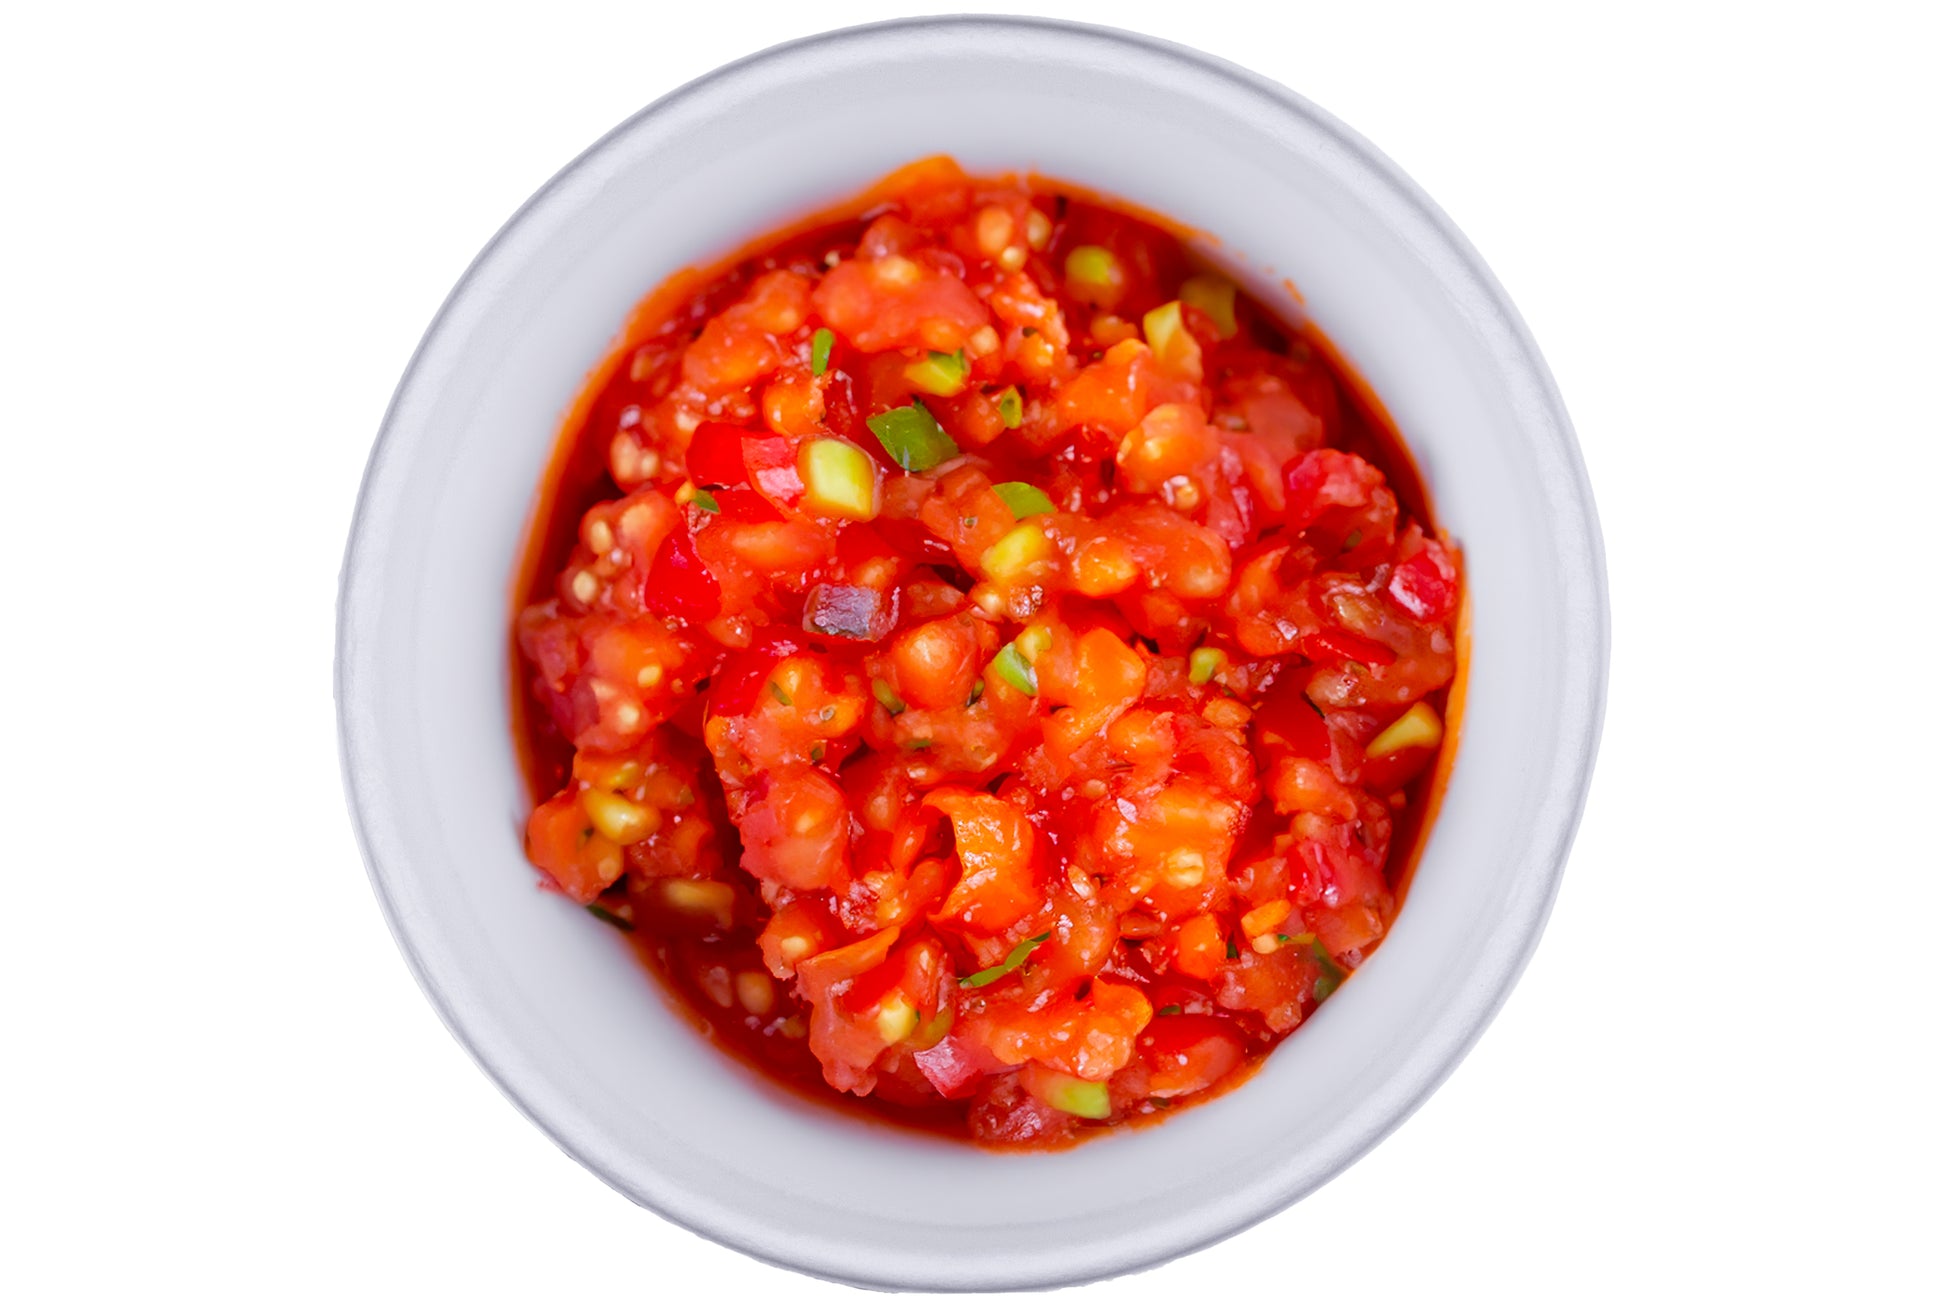 healthy-ingredients-included-salad-onion-red-pepper-tomatoes-corn-salsa-food-8-Oz-Round-Bowls-Compostable-Sugarcane-Bagasse-Bowl